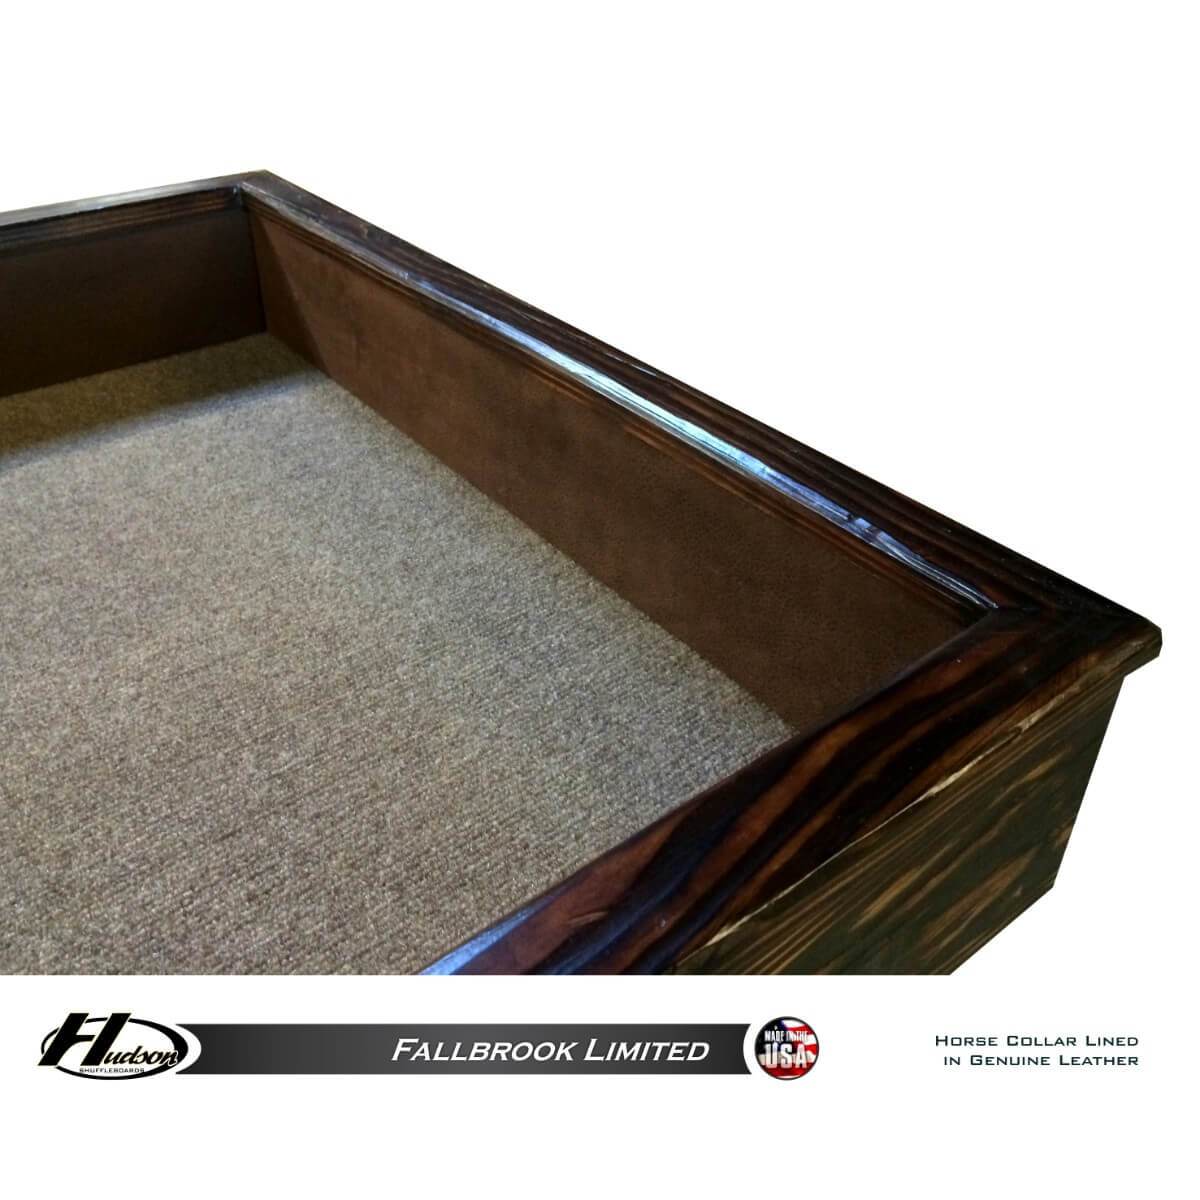 Hudson Fallbrook Limited Shuffleboard Table 9'-22' with Custom Stain Options - Gaming Blaze